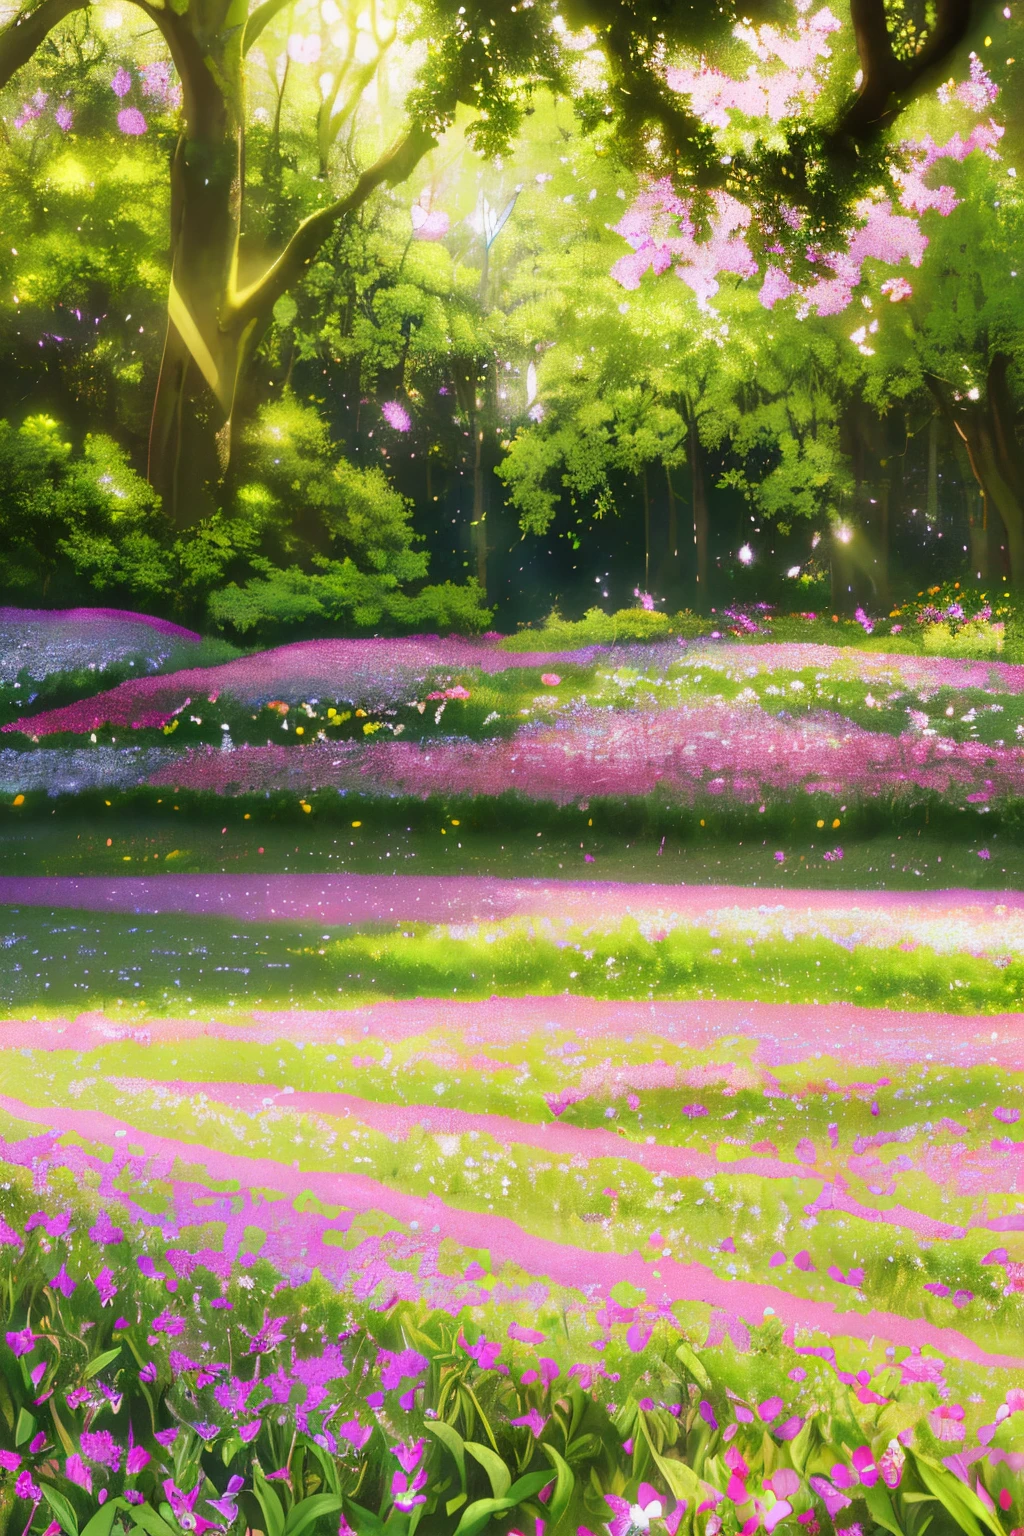 (best quality,4k,8k,highres,masterpiece:1.2),ultra-detailed,(realistic,photorealistic,photo-realistic:1.37),blooming flowers,nature scenery,beautiful garden,golden sunlight,serene atmosphere,delicate petals,vibrant colors,fresh fragrance,lush greenery,sparkling dewdrops,intricately textured leaves,flourishing plants,tall stems and delicate buds,soft breeze,scattered wildflowers,butterflies fluttering around,buzzing bees collecting nectar,peaceful sounds of nature,harmonious composition,blending hues of pinks,reds,yellows and purples,whispering grass,gentle rustling of leaves,playful sunlight and shadows,tranquil ambiance,vision of spring,overwhelming beauty of nature.